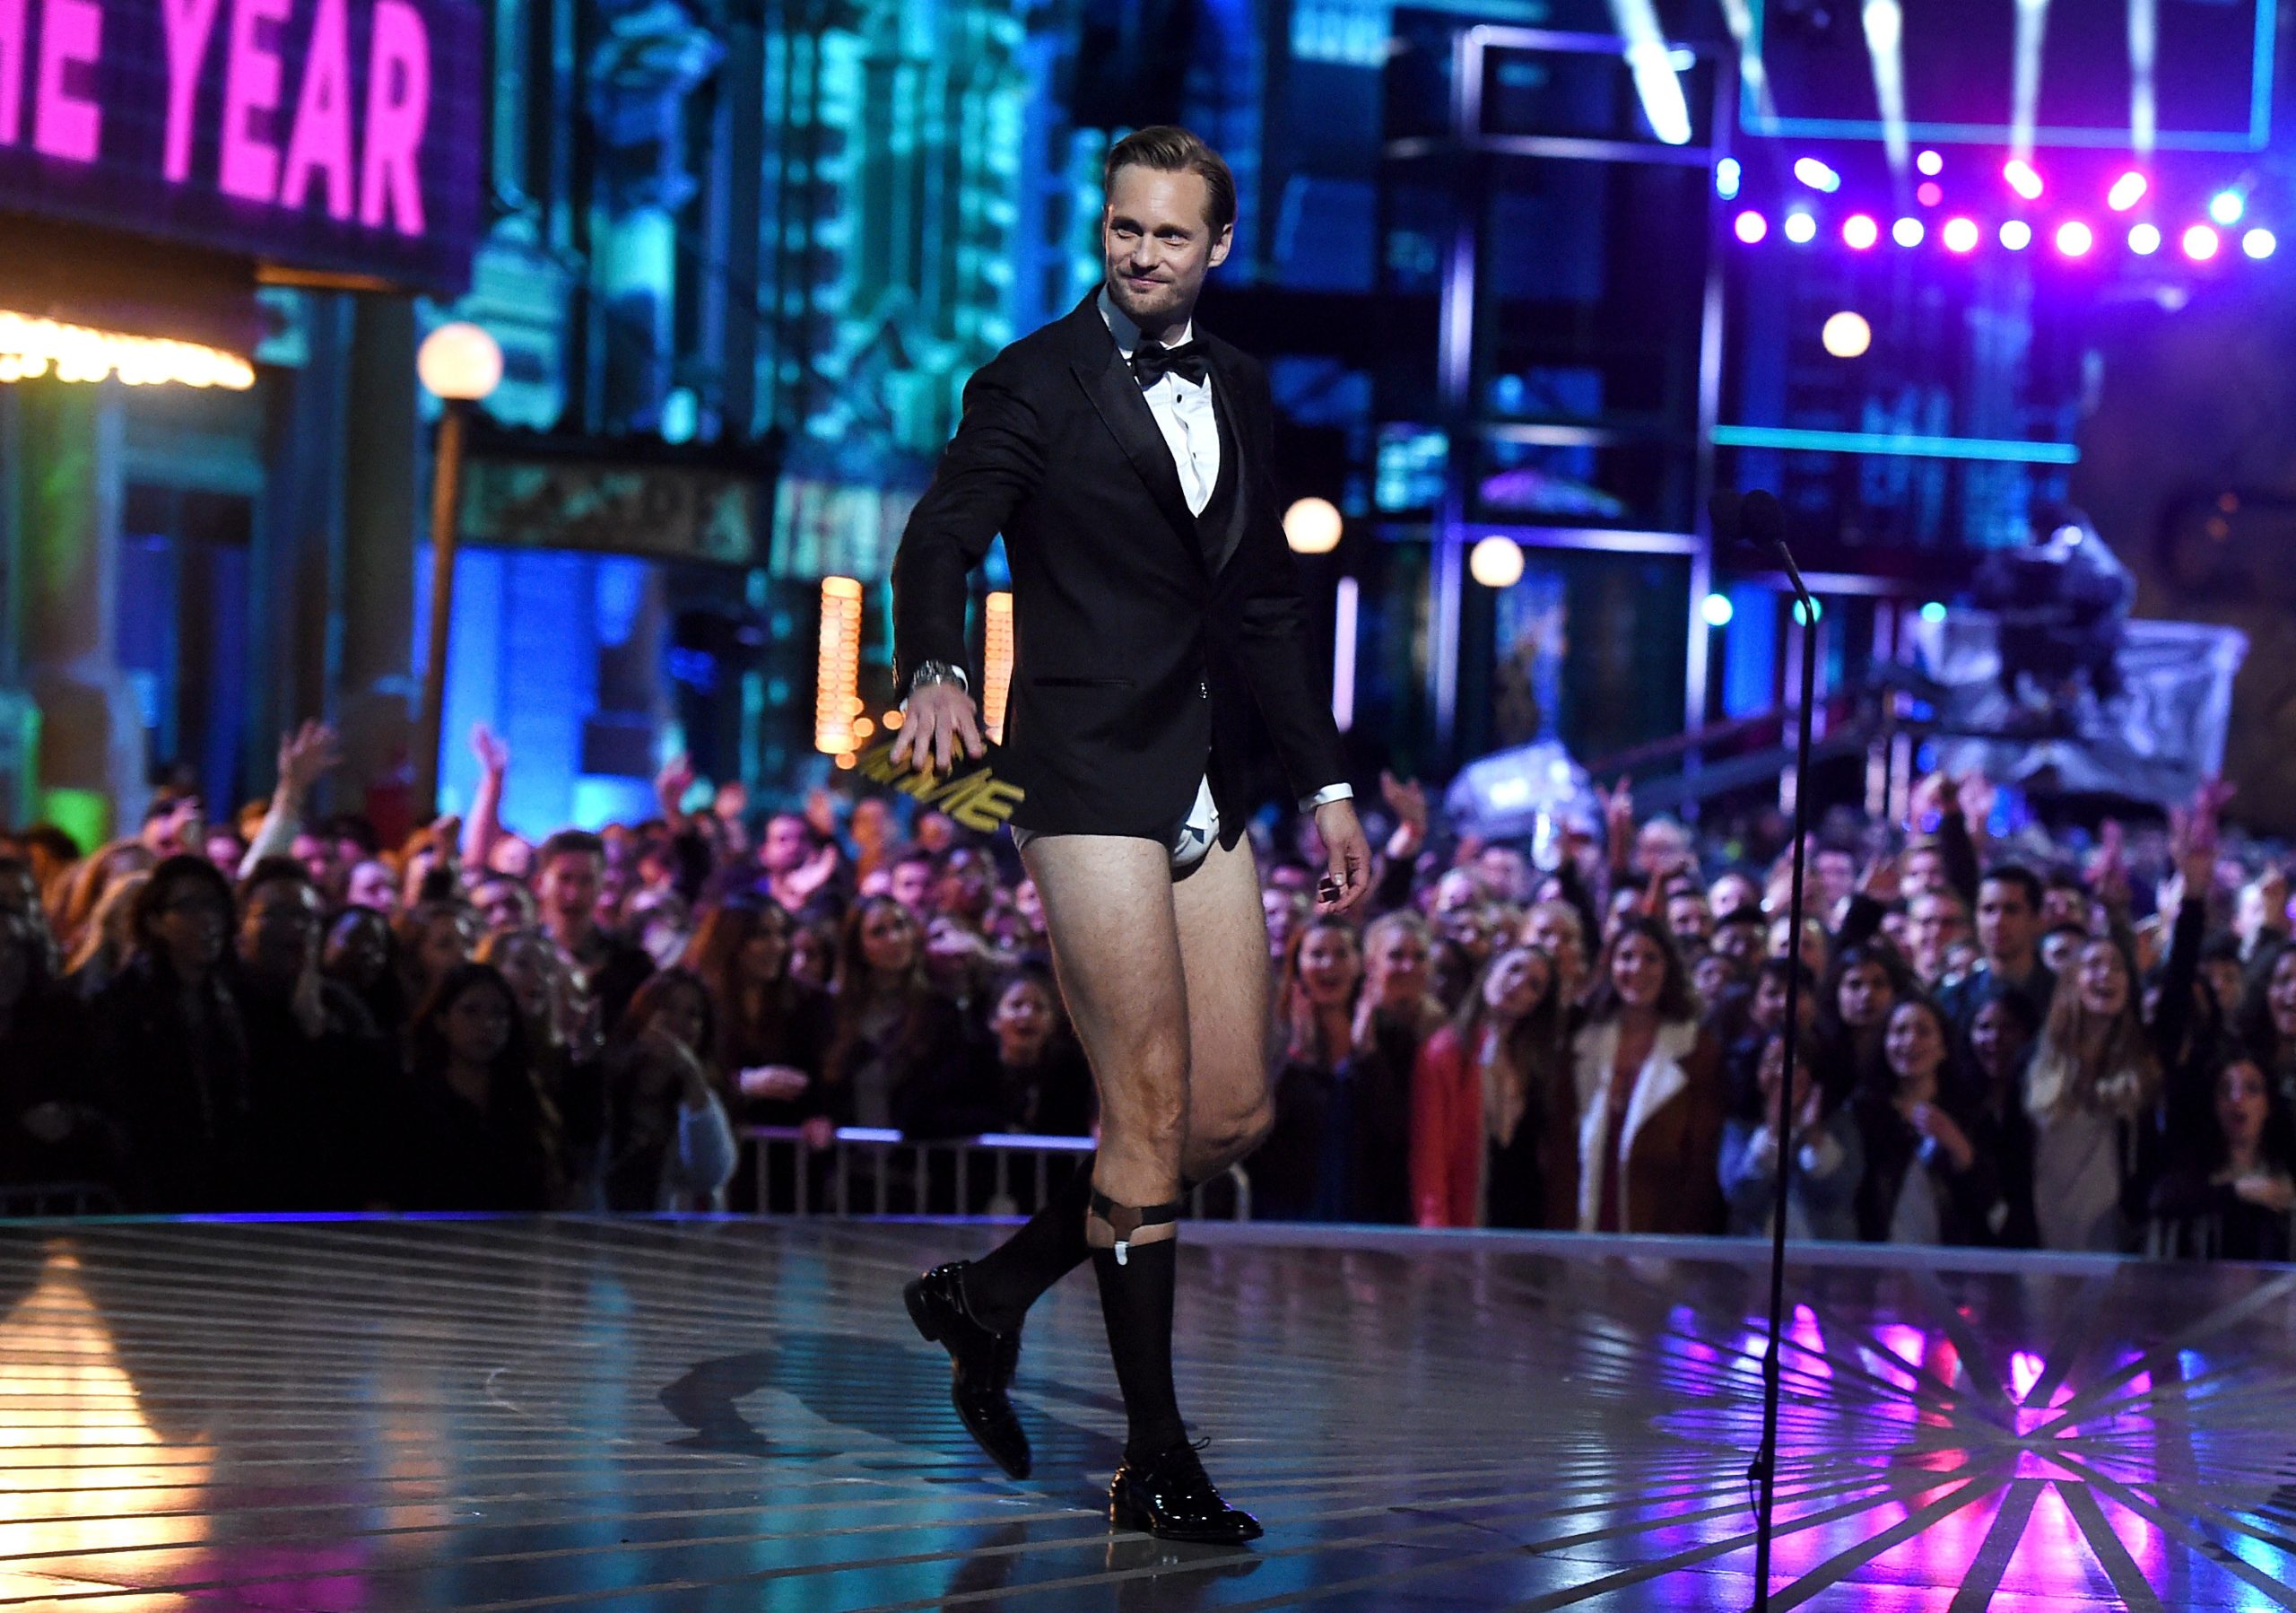 Alexander Skarsgard appears on stage in his underpants at MTV Movie Awards